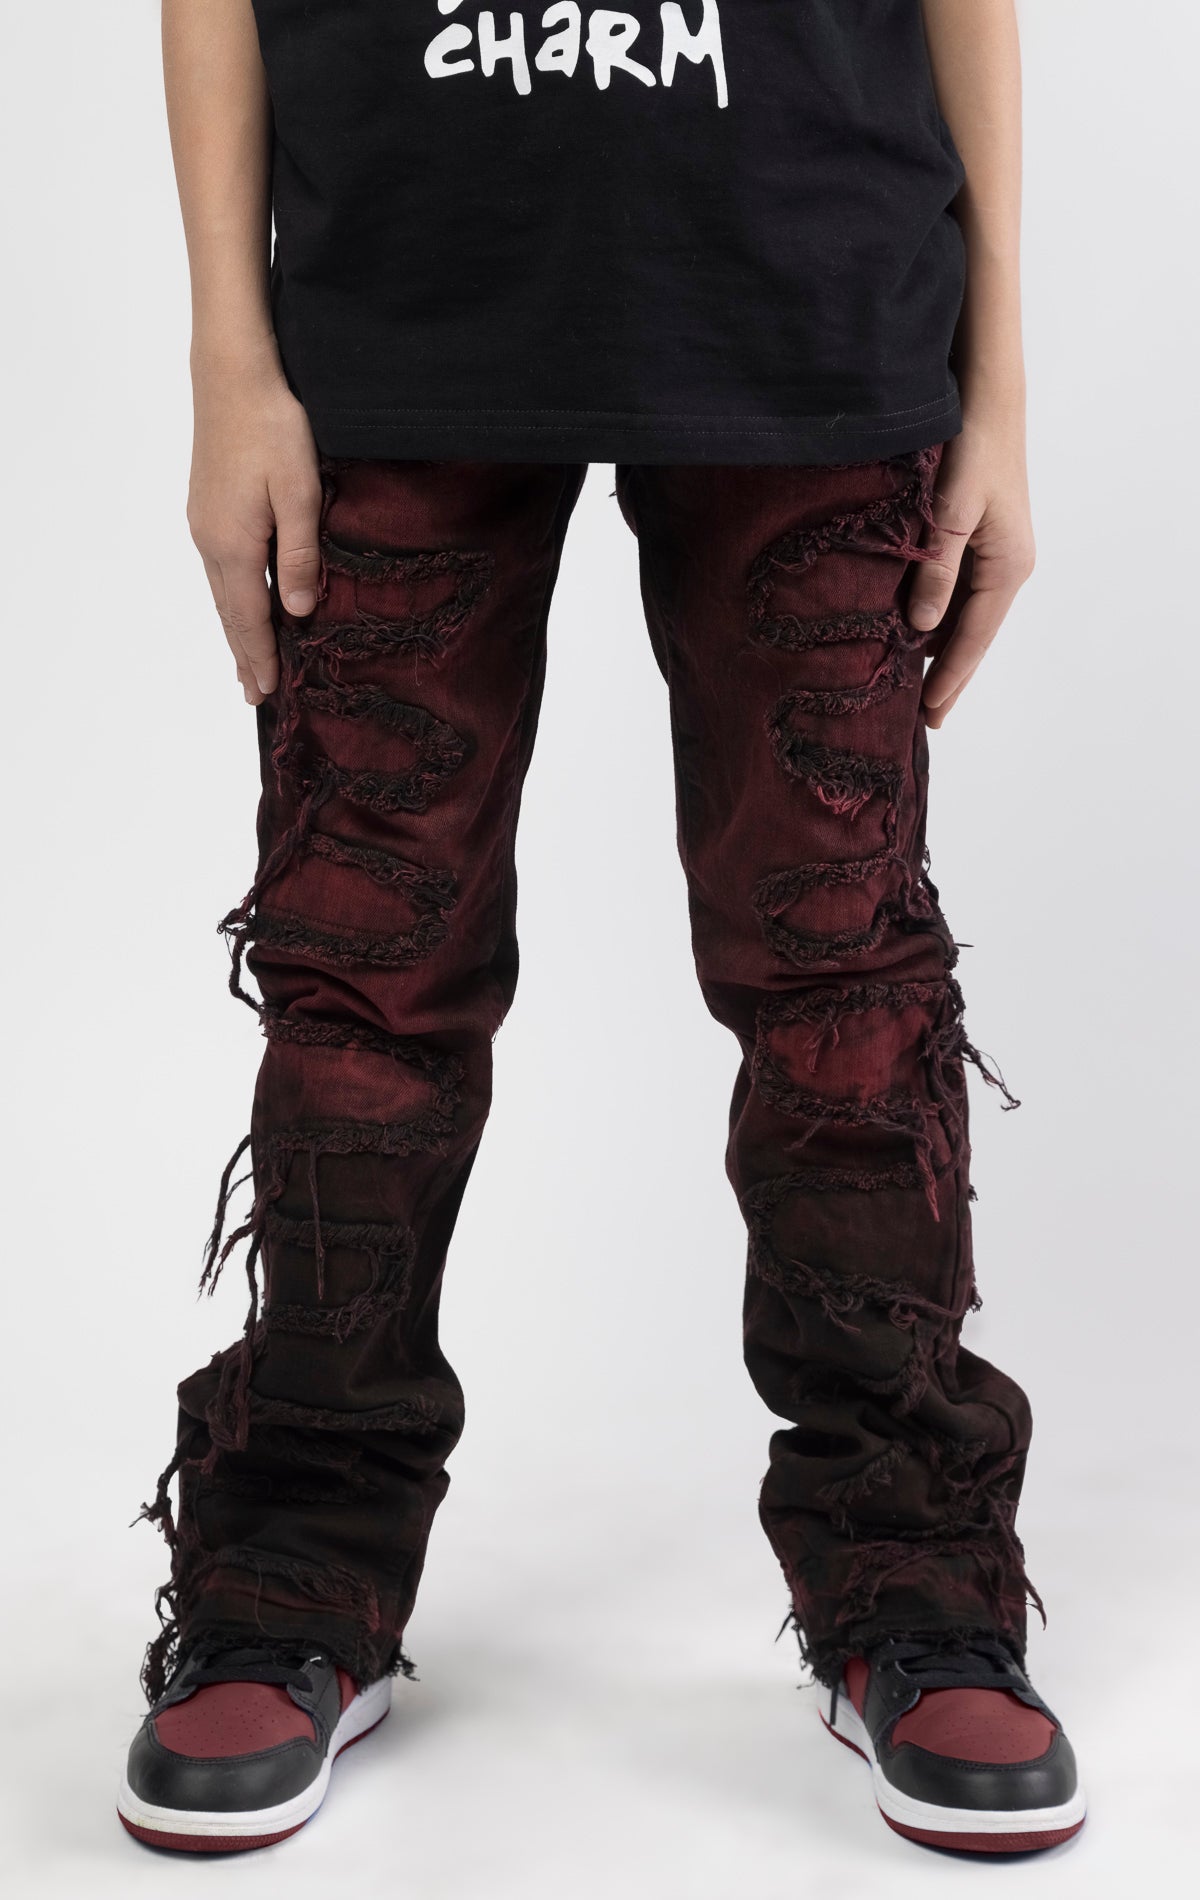 Skinny fit Regular rise denim with extended length for maximum stacks. Magma ombre wash with rip and repair design featuring self fabric backing. Patches and abrasions throughout for a trendy and edgy look.